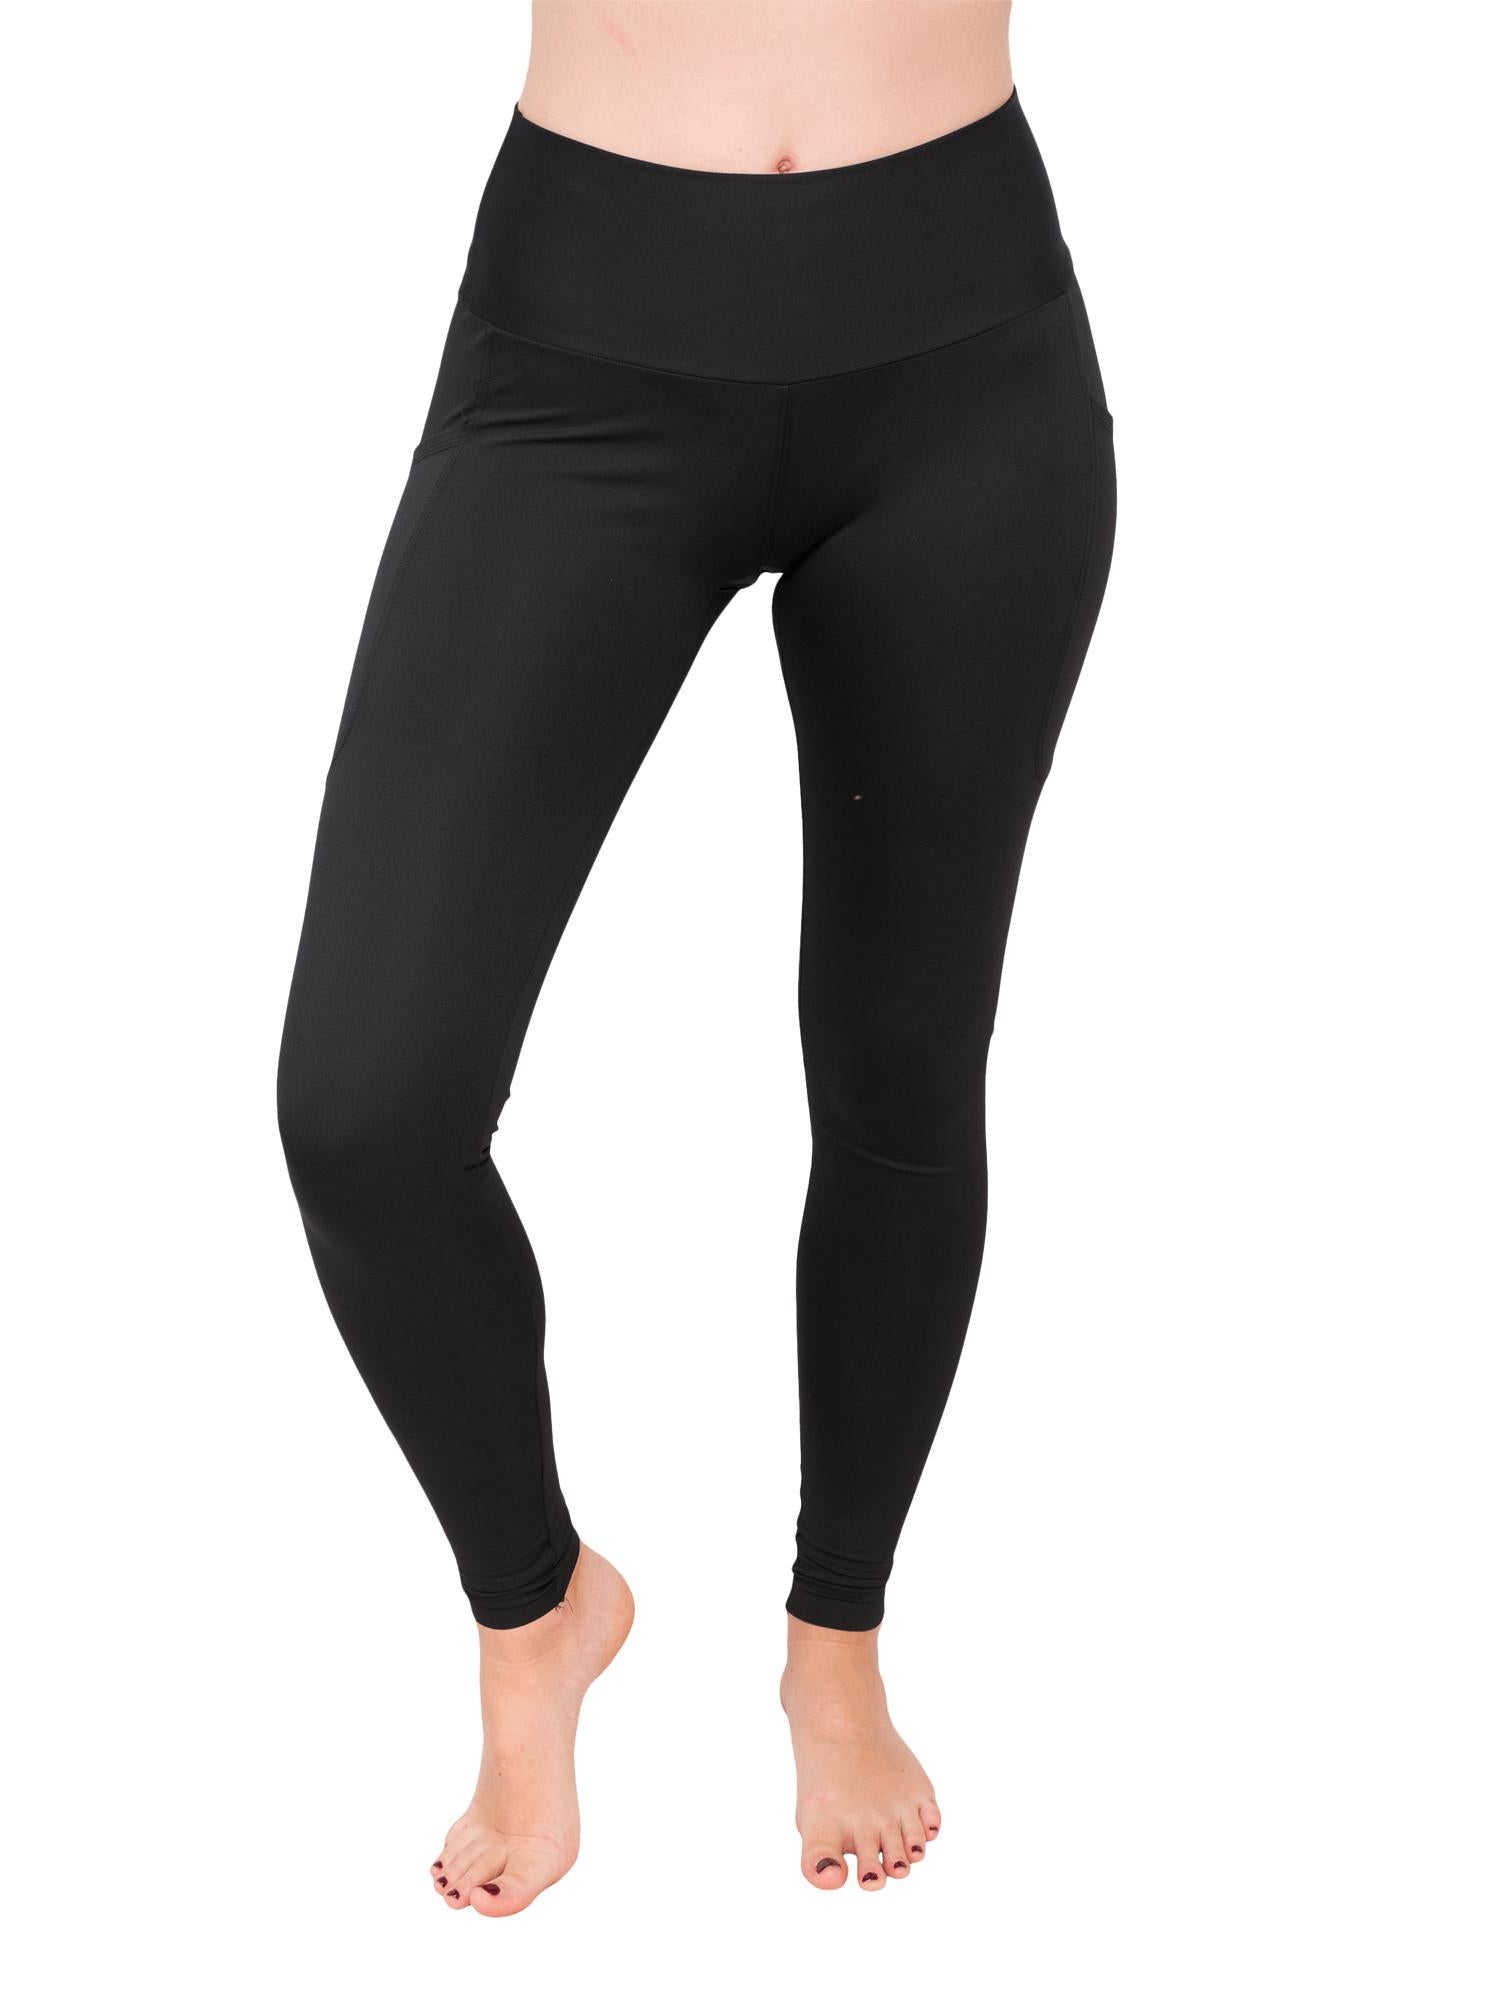 Black Leggings With Cut Out Knees / Yoga Pants / Gym Pants / Black Lycra /  One Size / Stretch Leggings. -  Canada